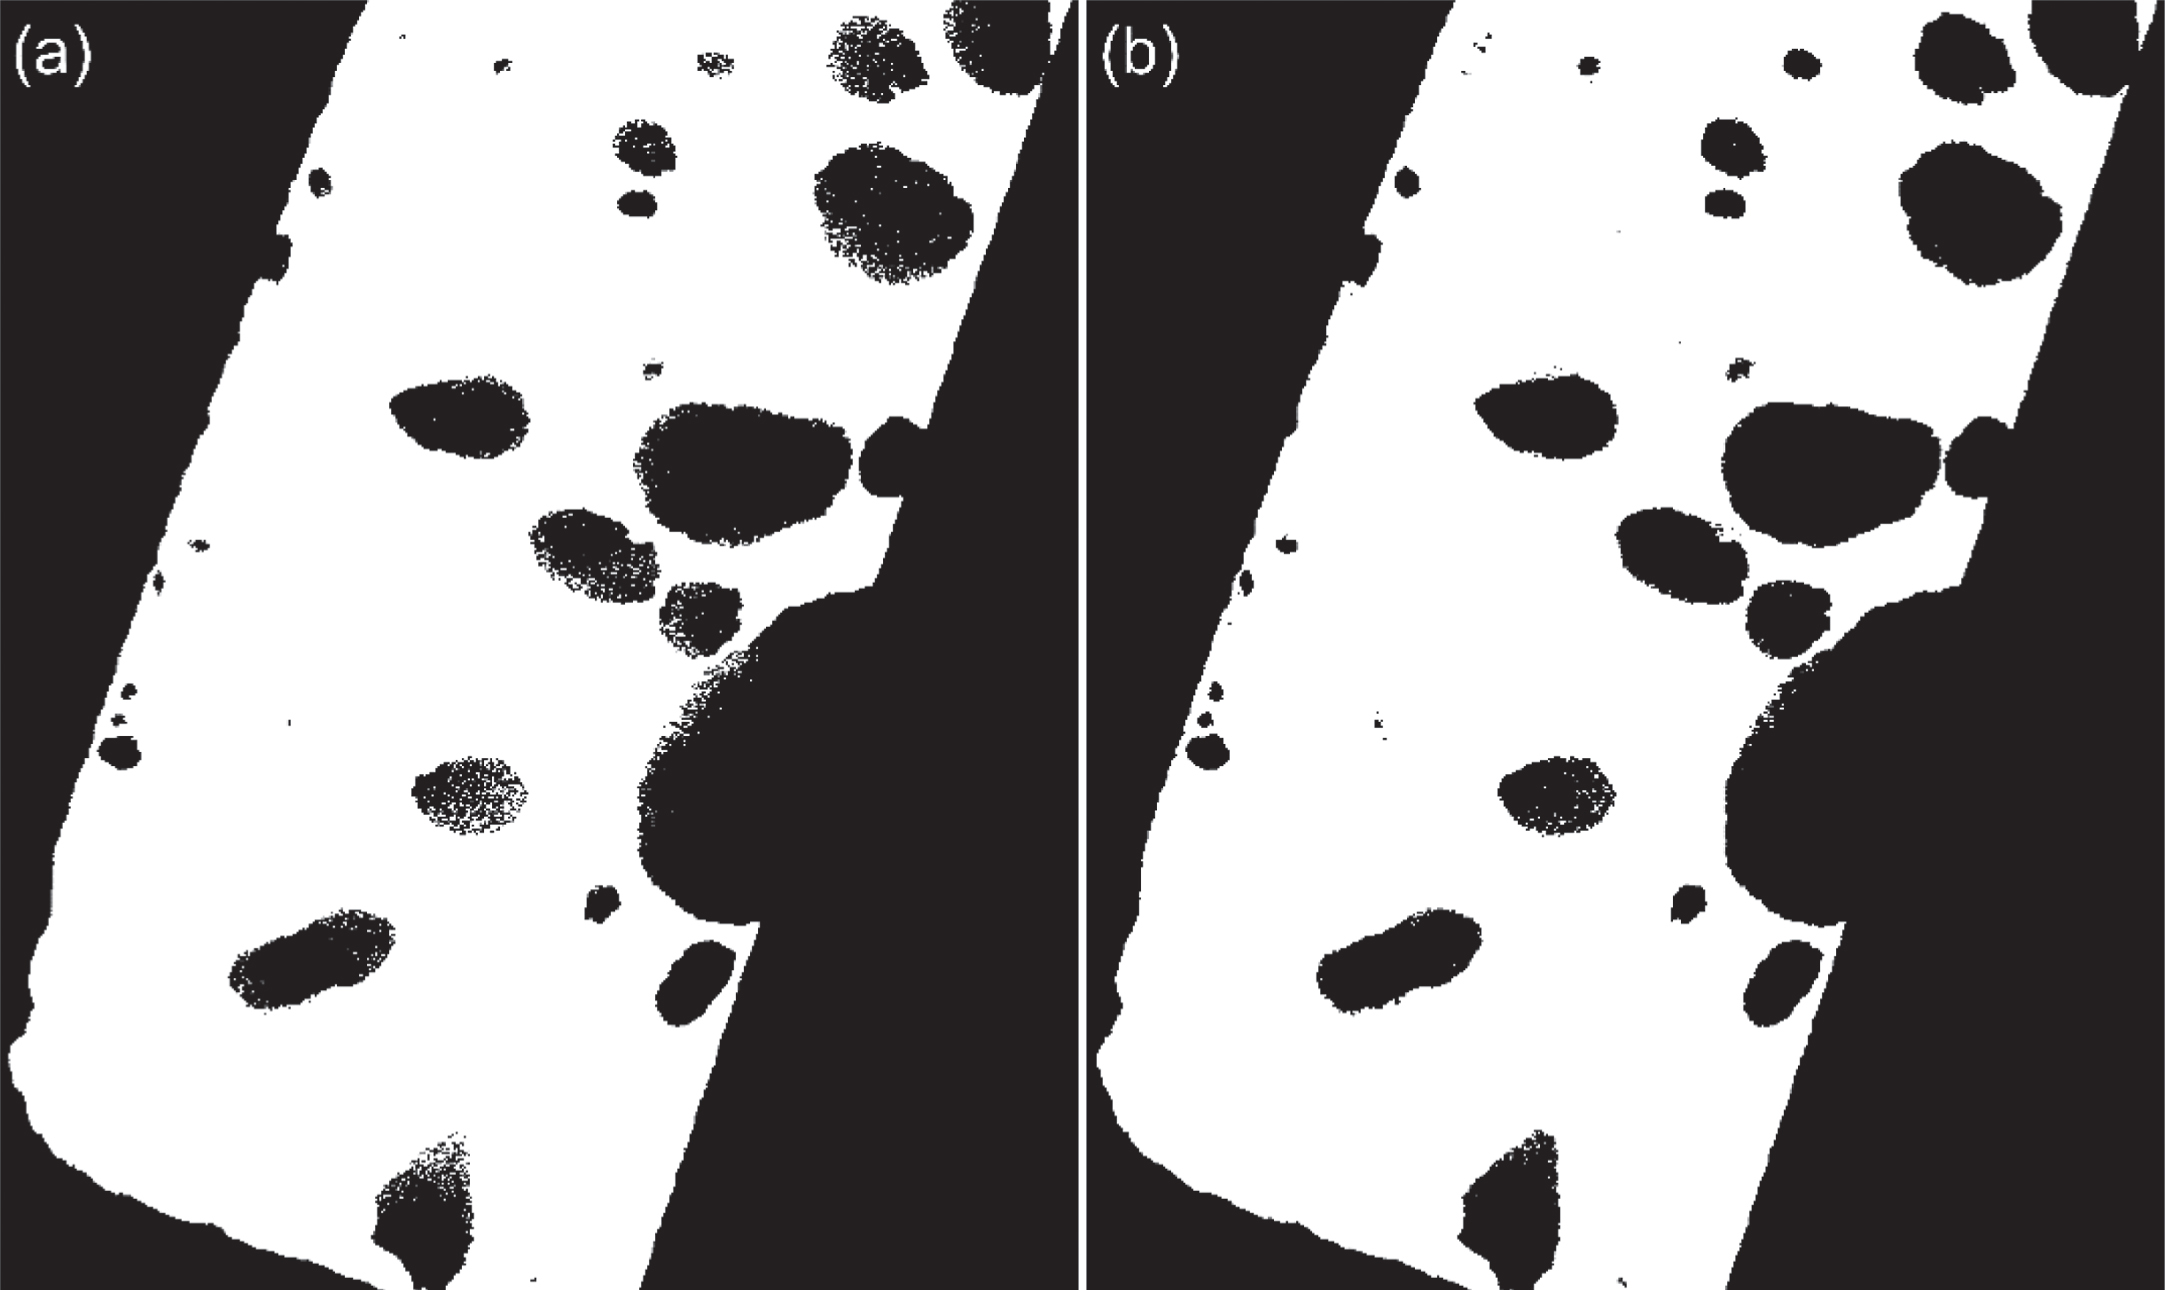 (a) Otsu and (b) MRF results for the steel column CT image shown in Fig. 3(a).